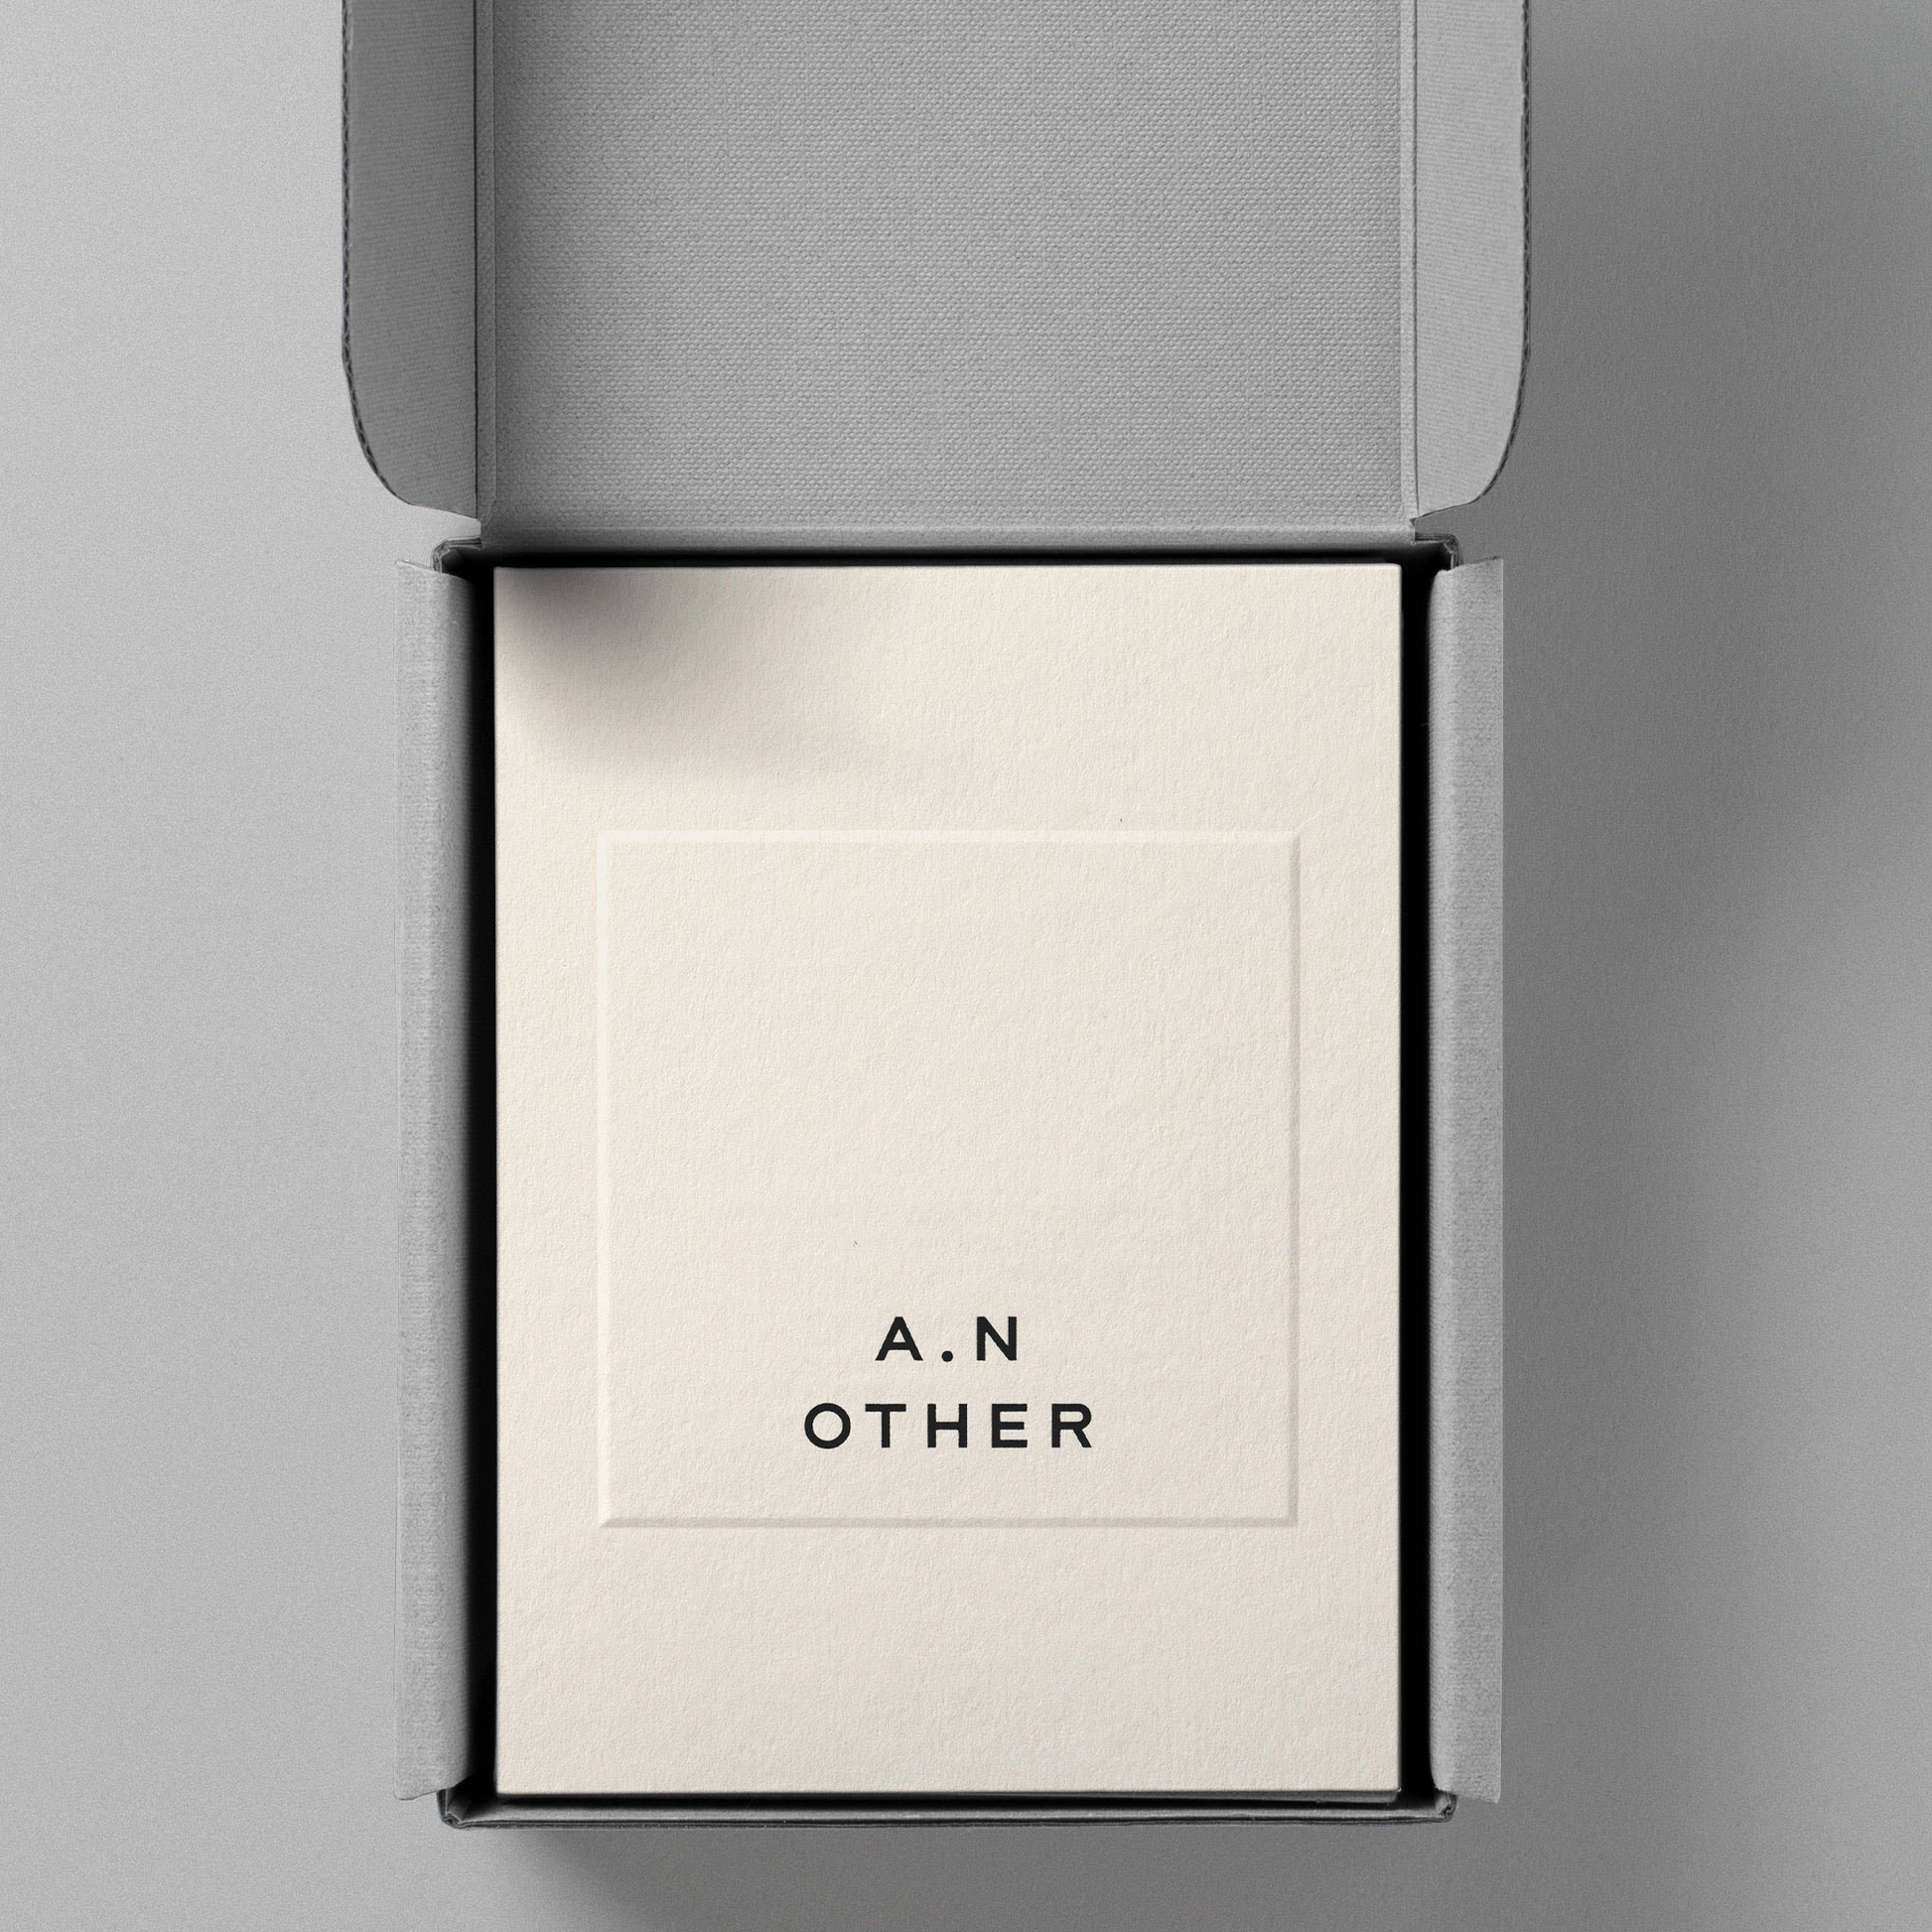 A.N Other WF/2020 Perfume: A new interpretation to a secret 19th century Patchouli formula by Catherine Selig.